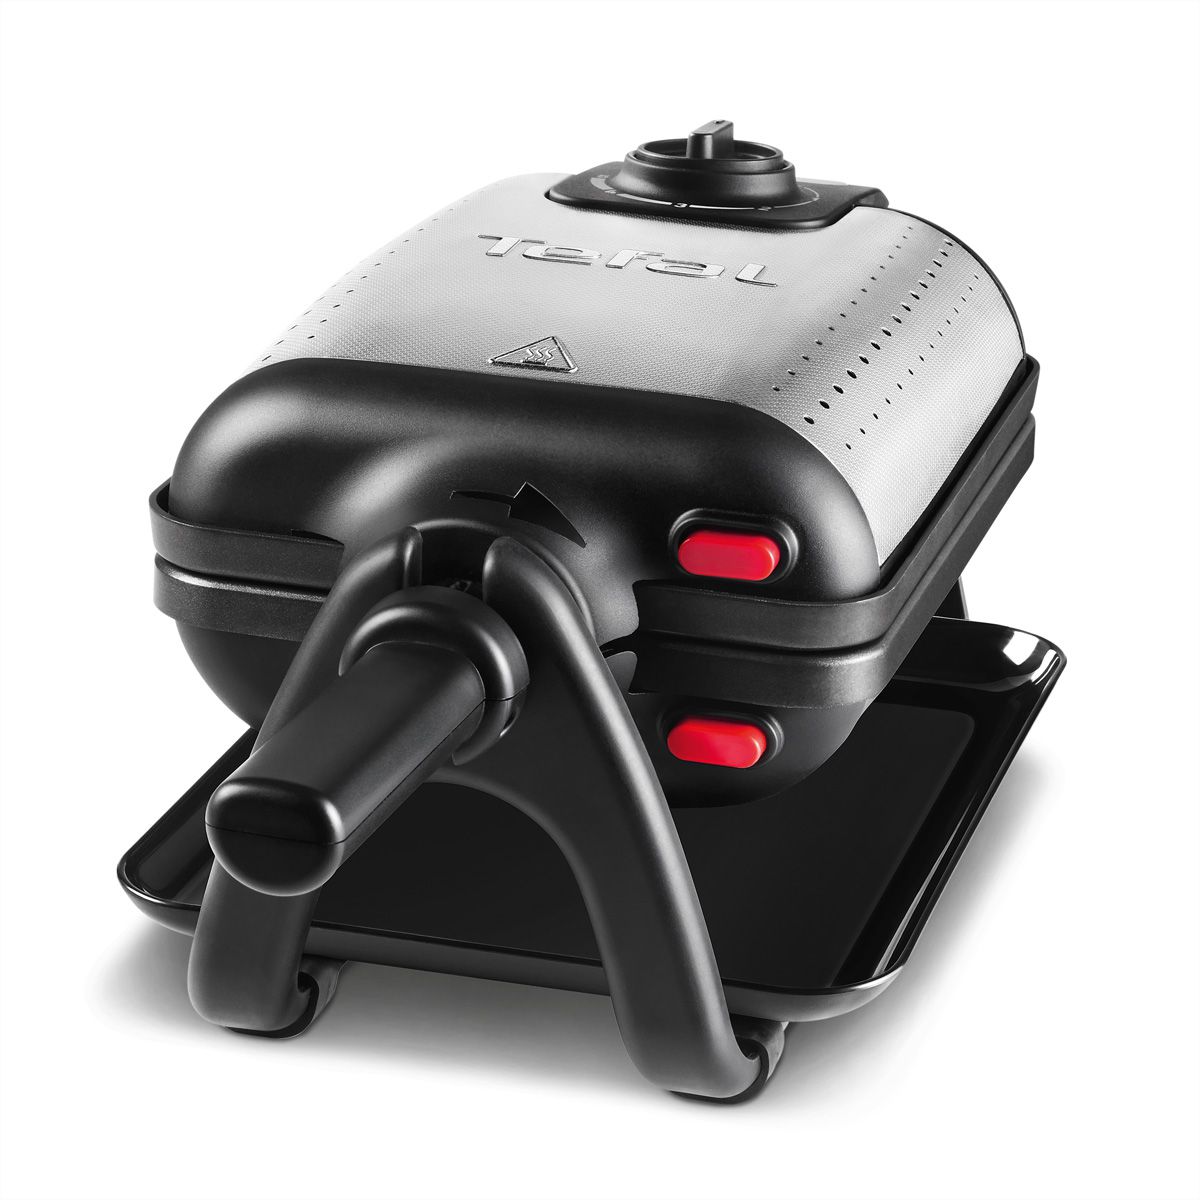 Tefal gaufrier WM755D, King Size 4in1 - SECOMP AG